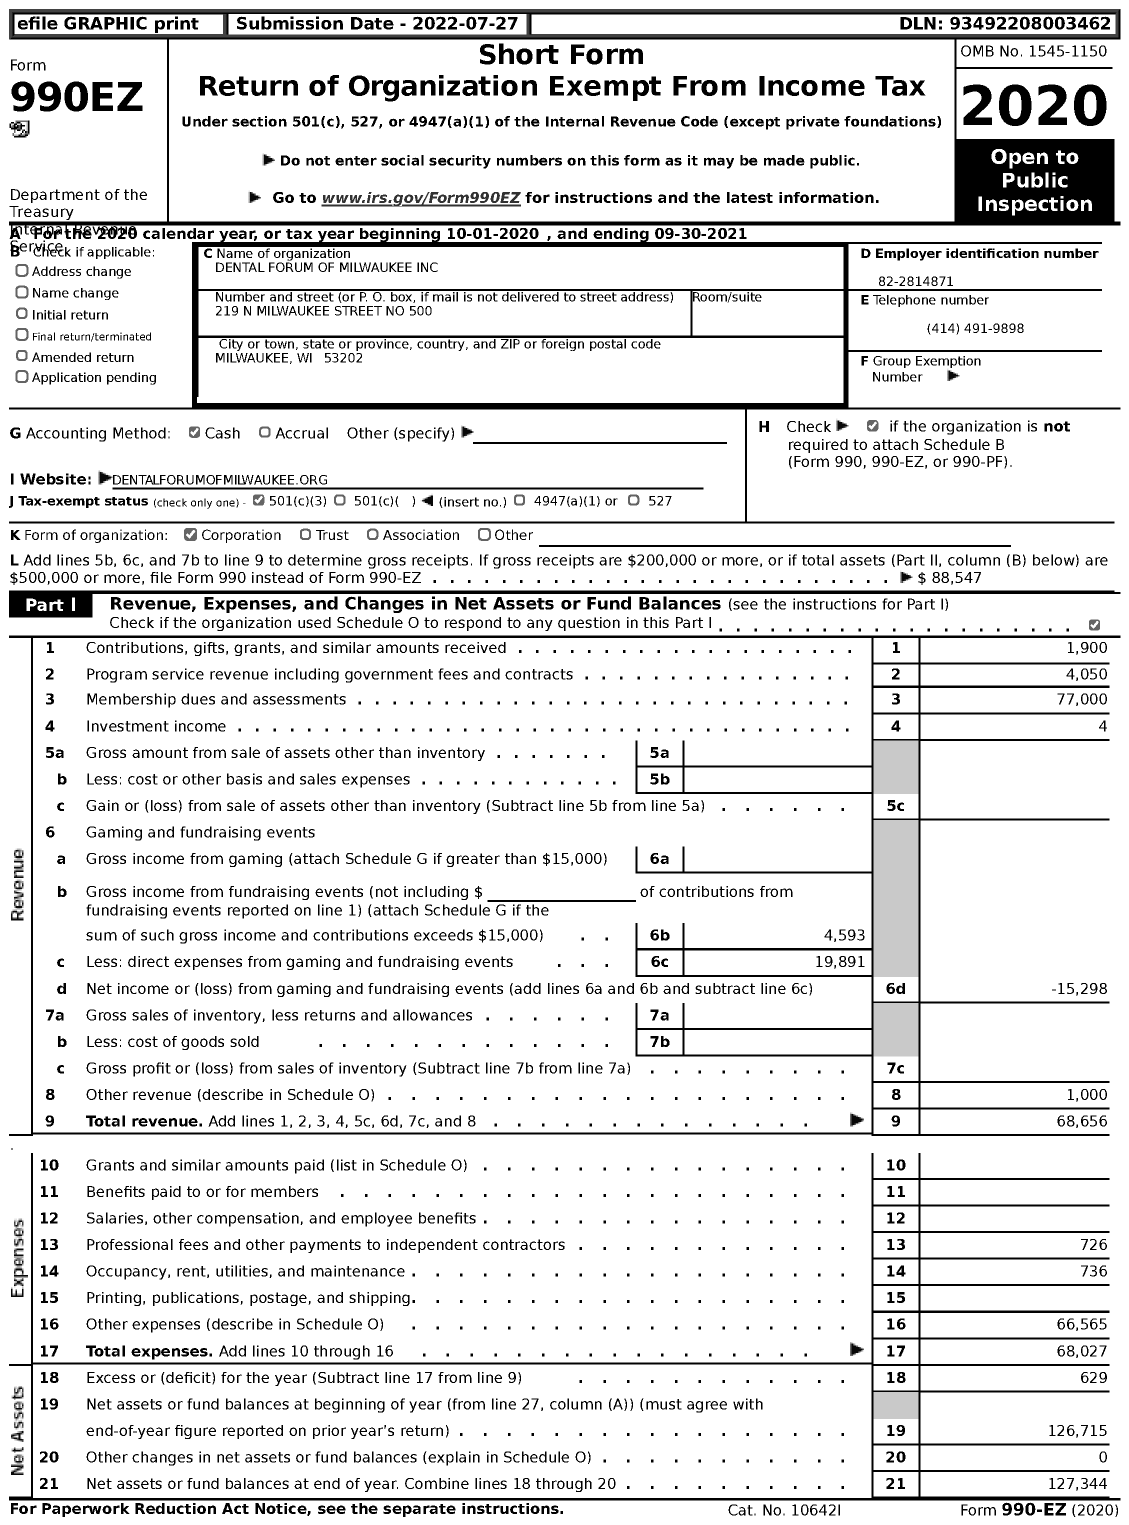 Image of first page of 2020 Form 990EZ for Dental Forum of Milwaukee